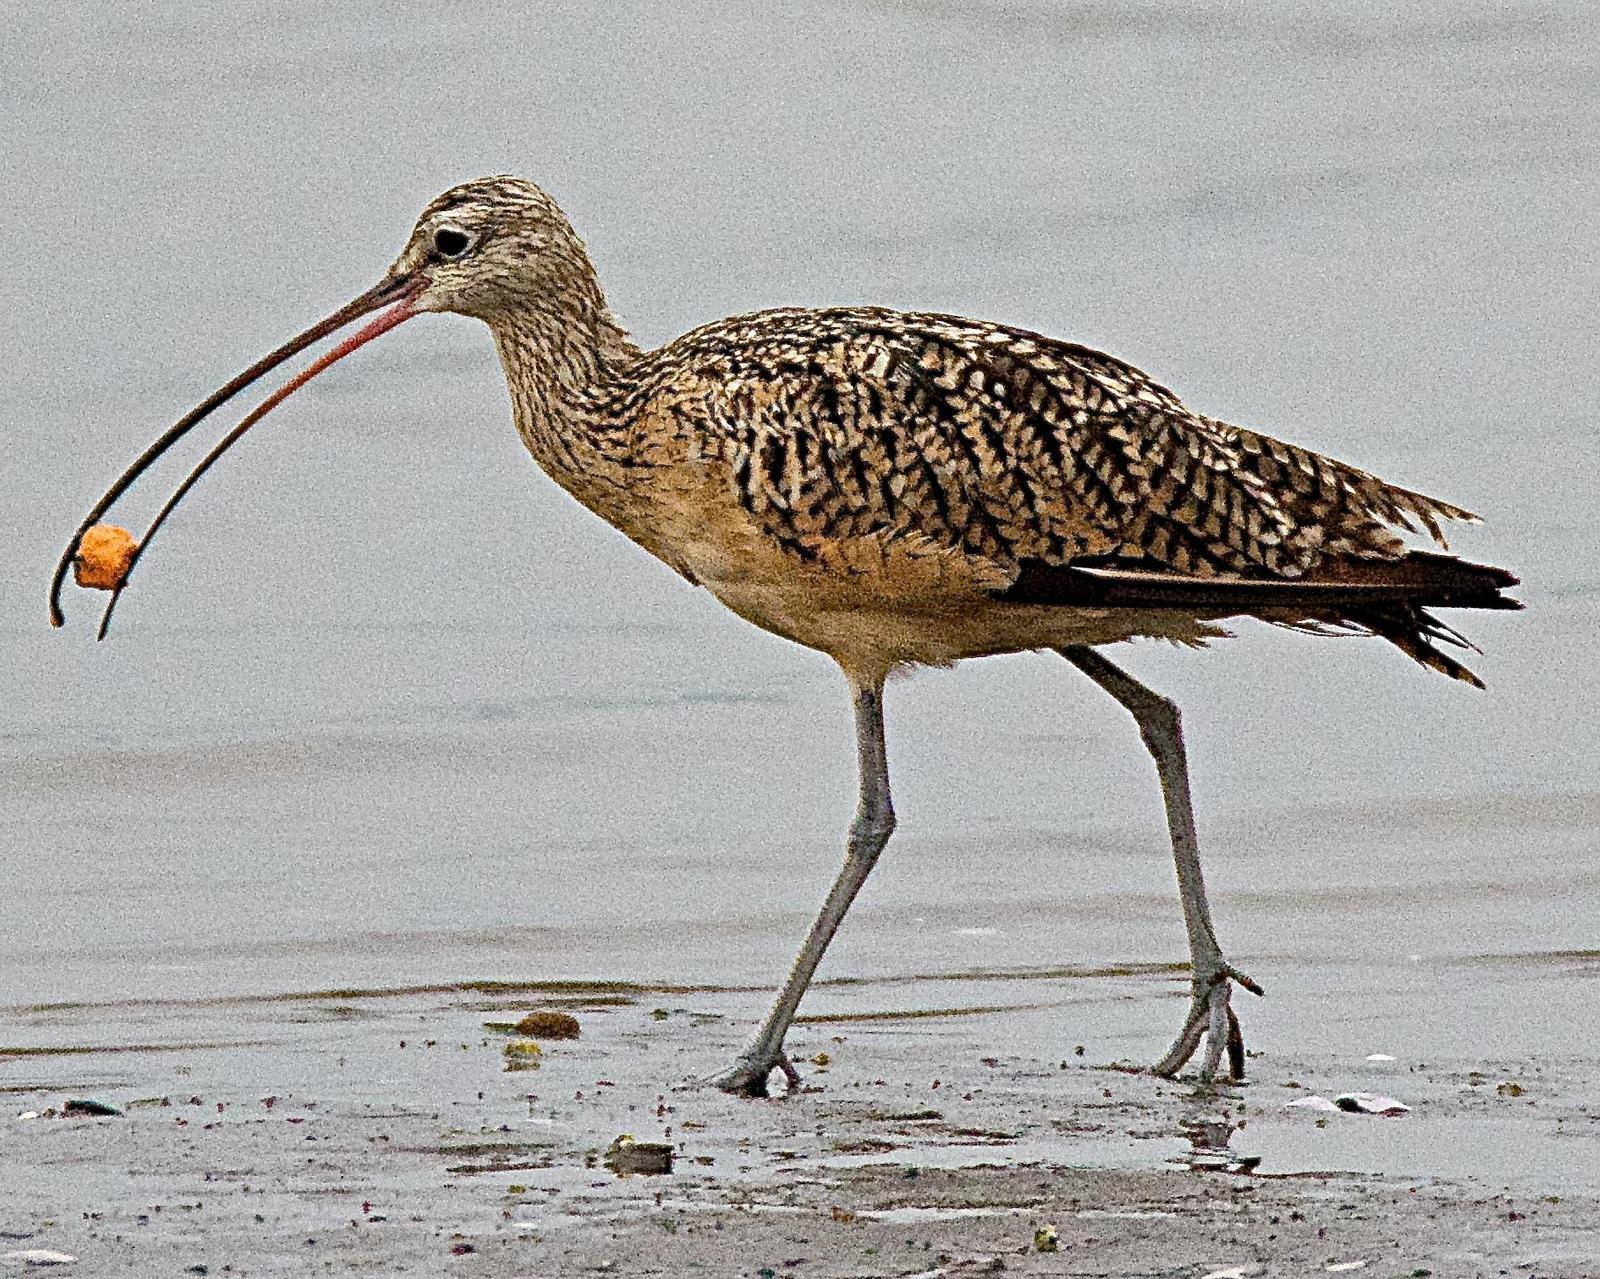 Long-billed Curlew Photo by Brian Avent